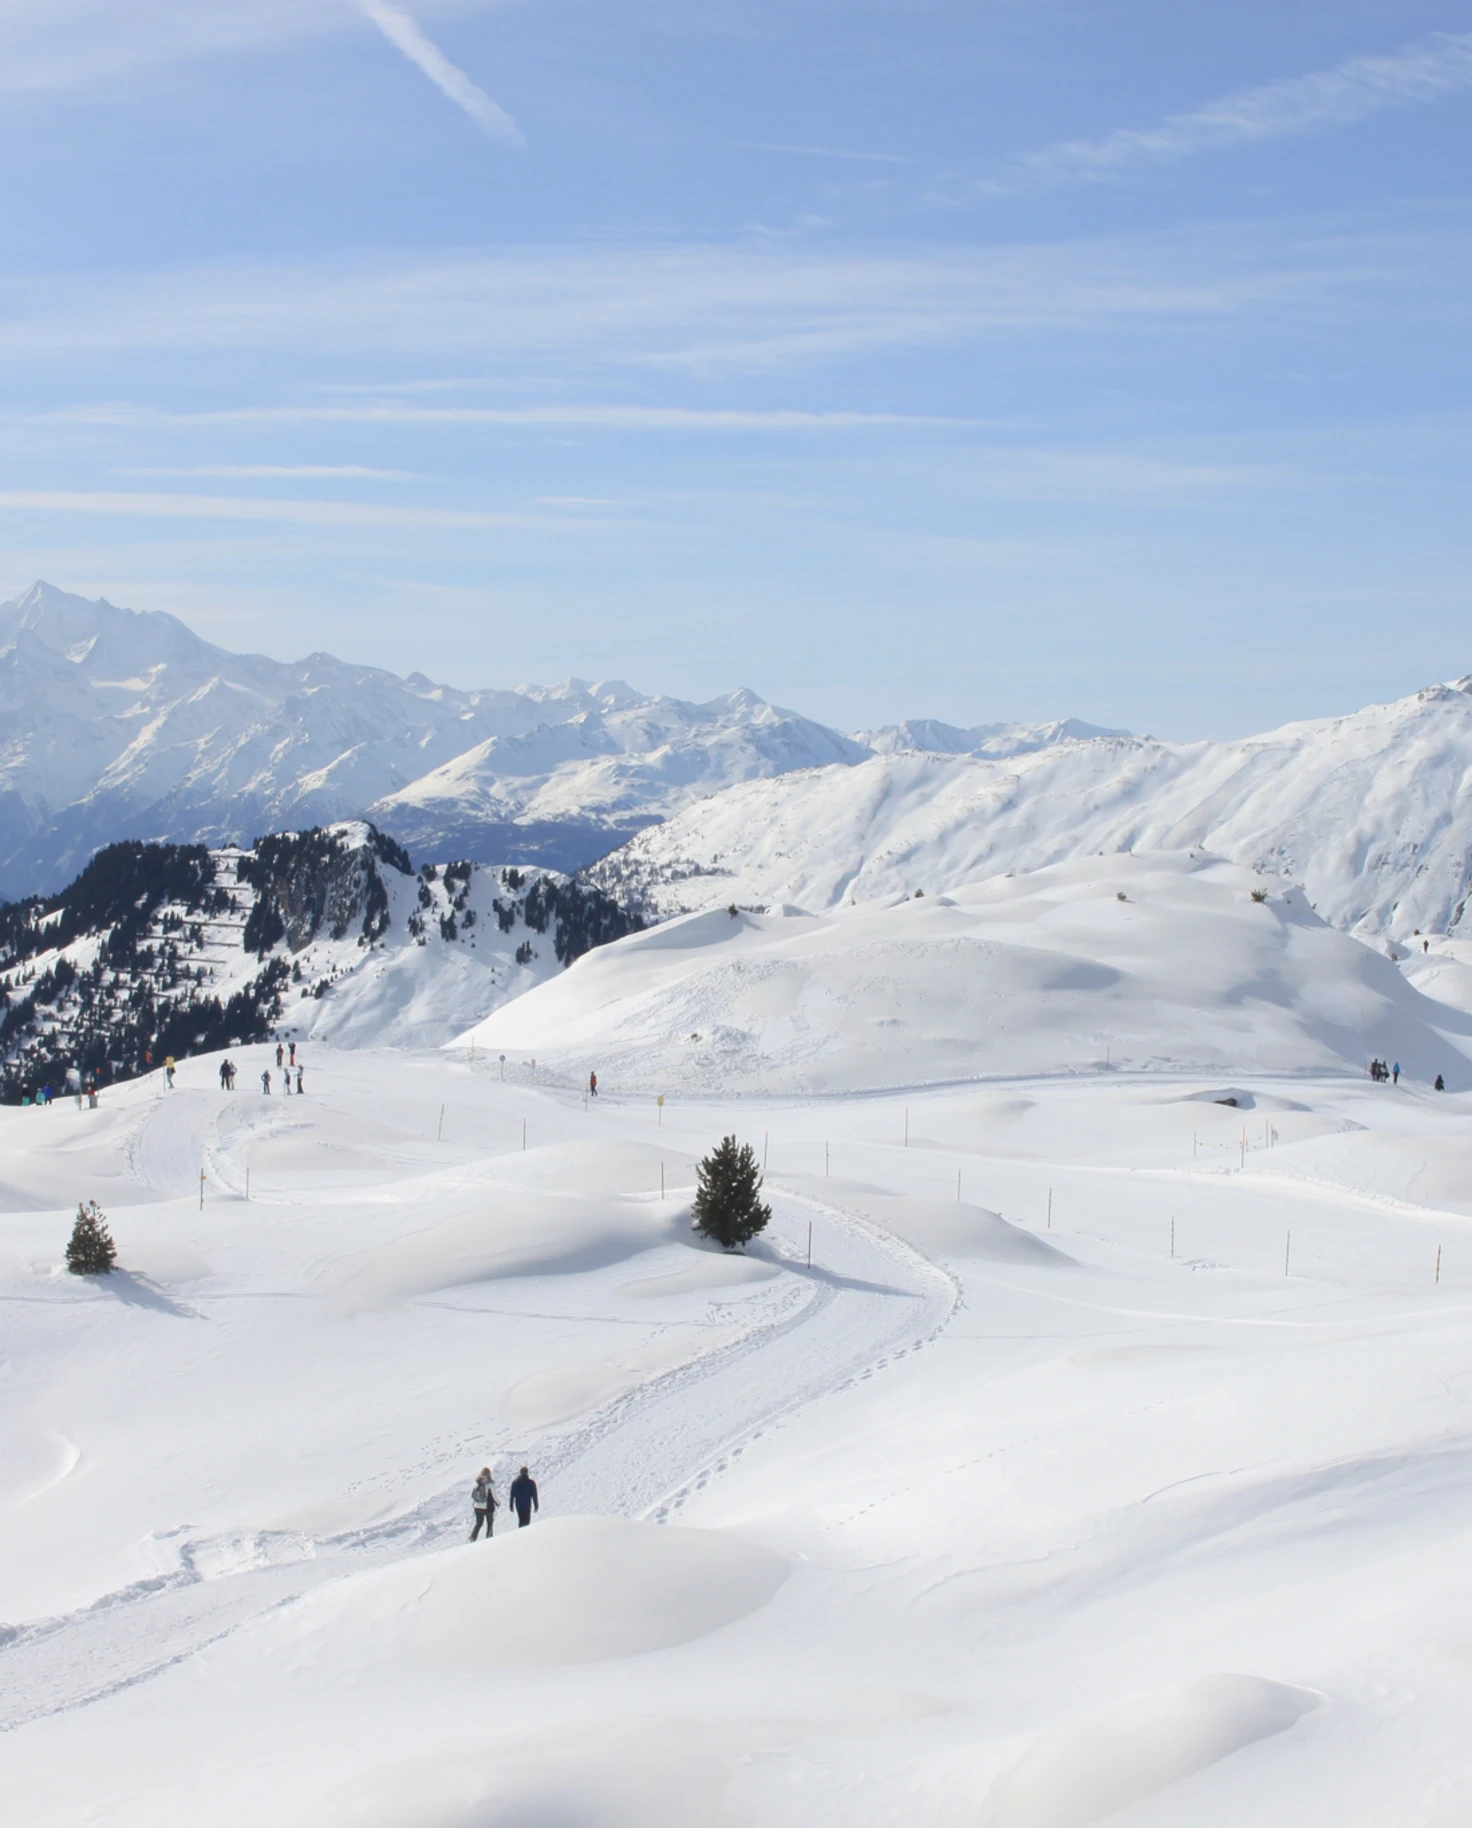 Skiing mountains covered in snow in Switzerland. 